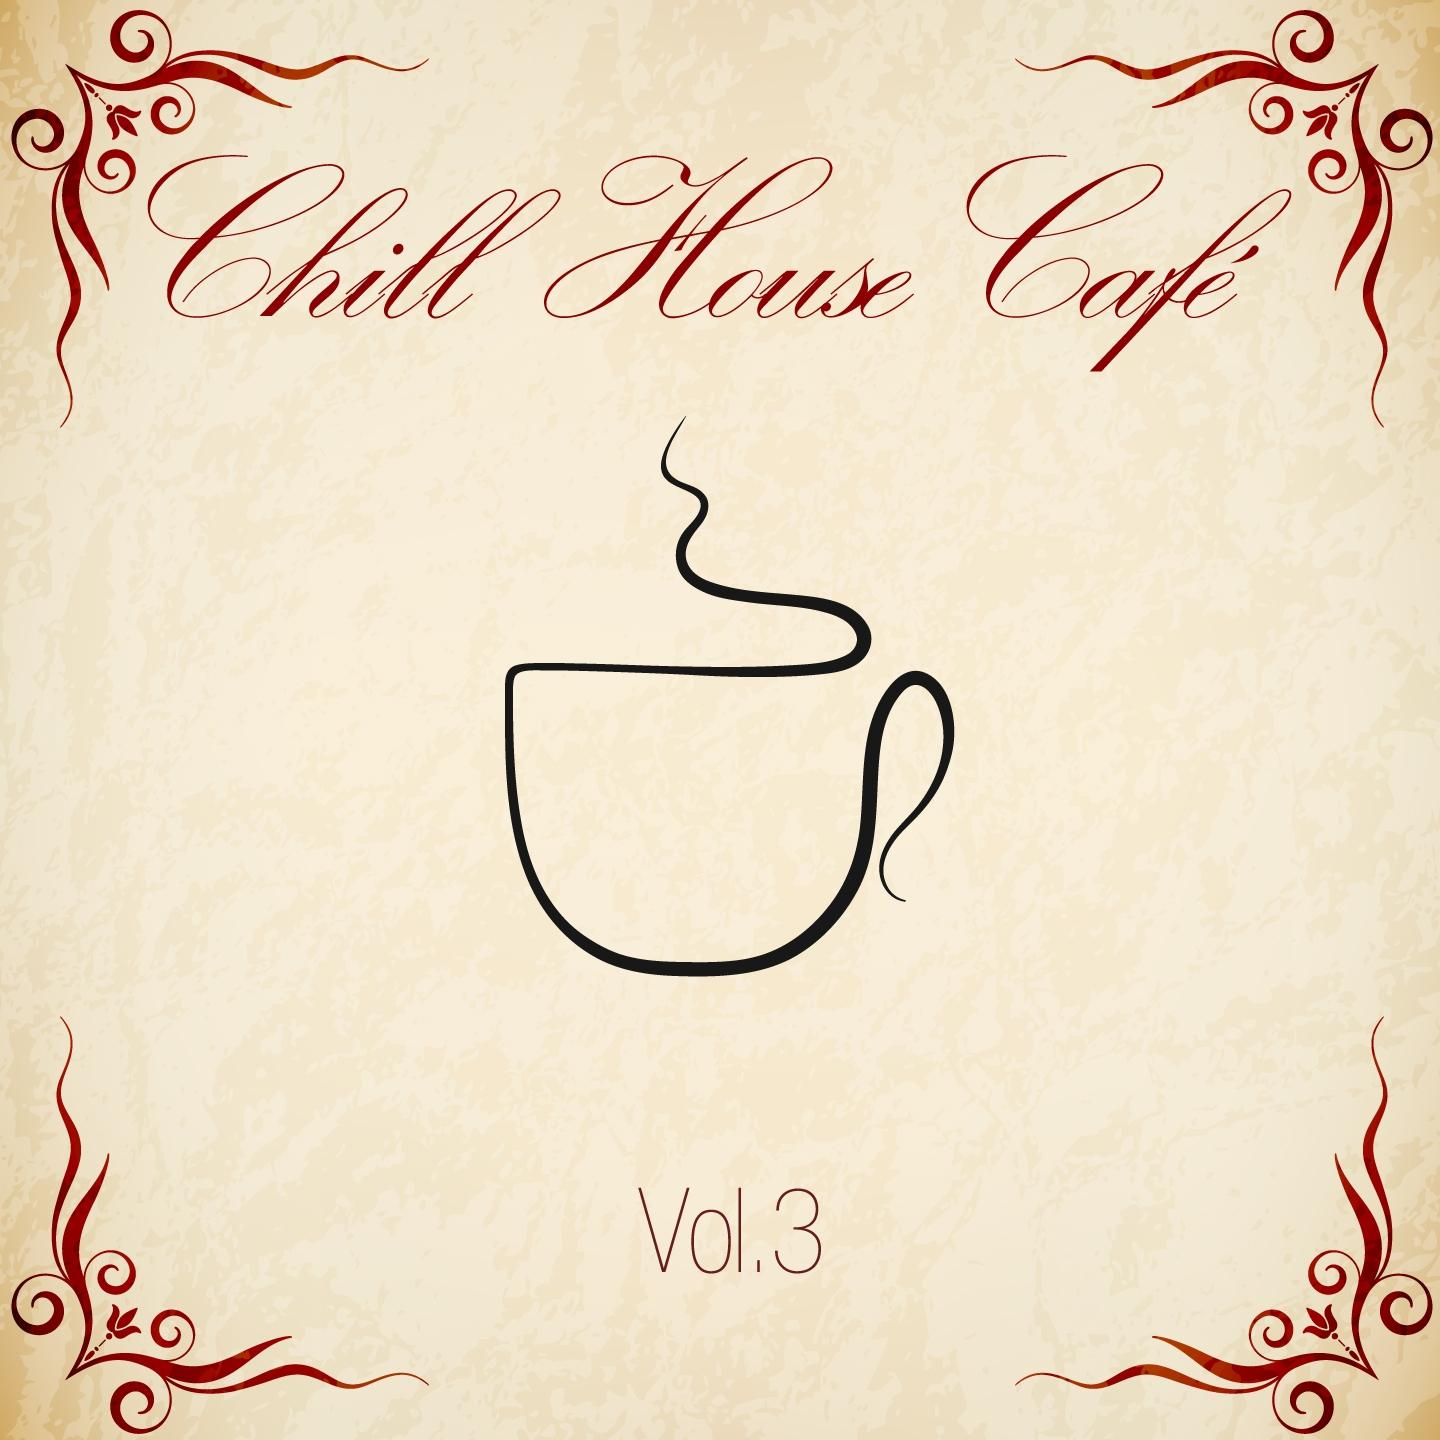 Chill House Cafe, Vol. 3